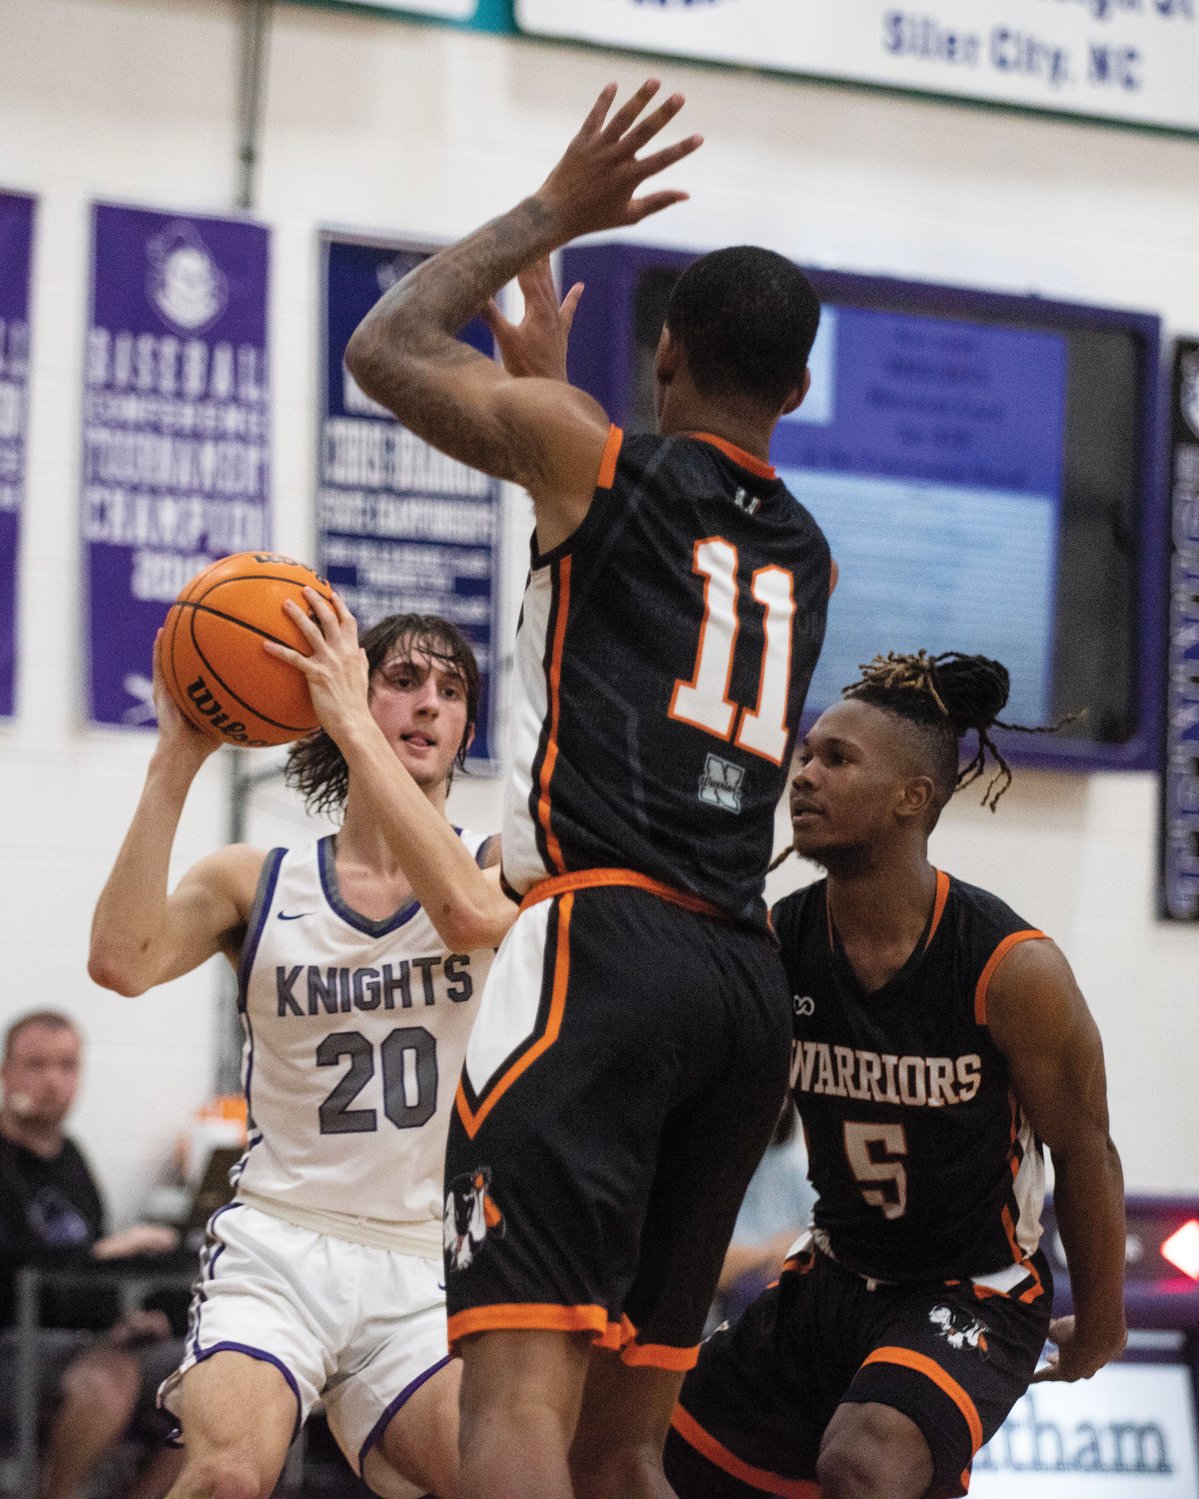 Chatham Charter senior Adam Harvey scored a game-high 19 points Saturday in the Knights' win over Washington County in the third round of the 1A state playoffs.